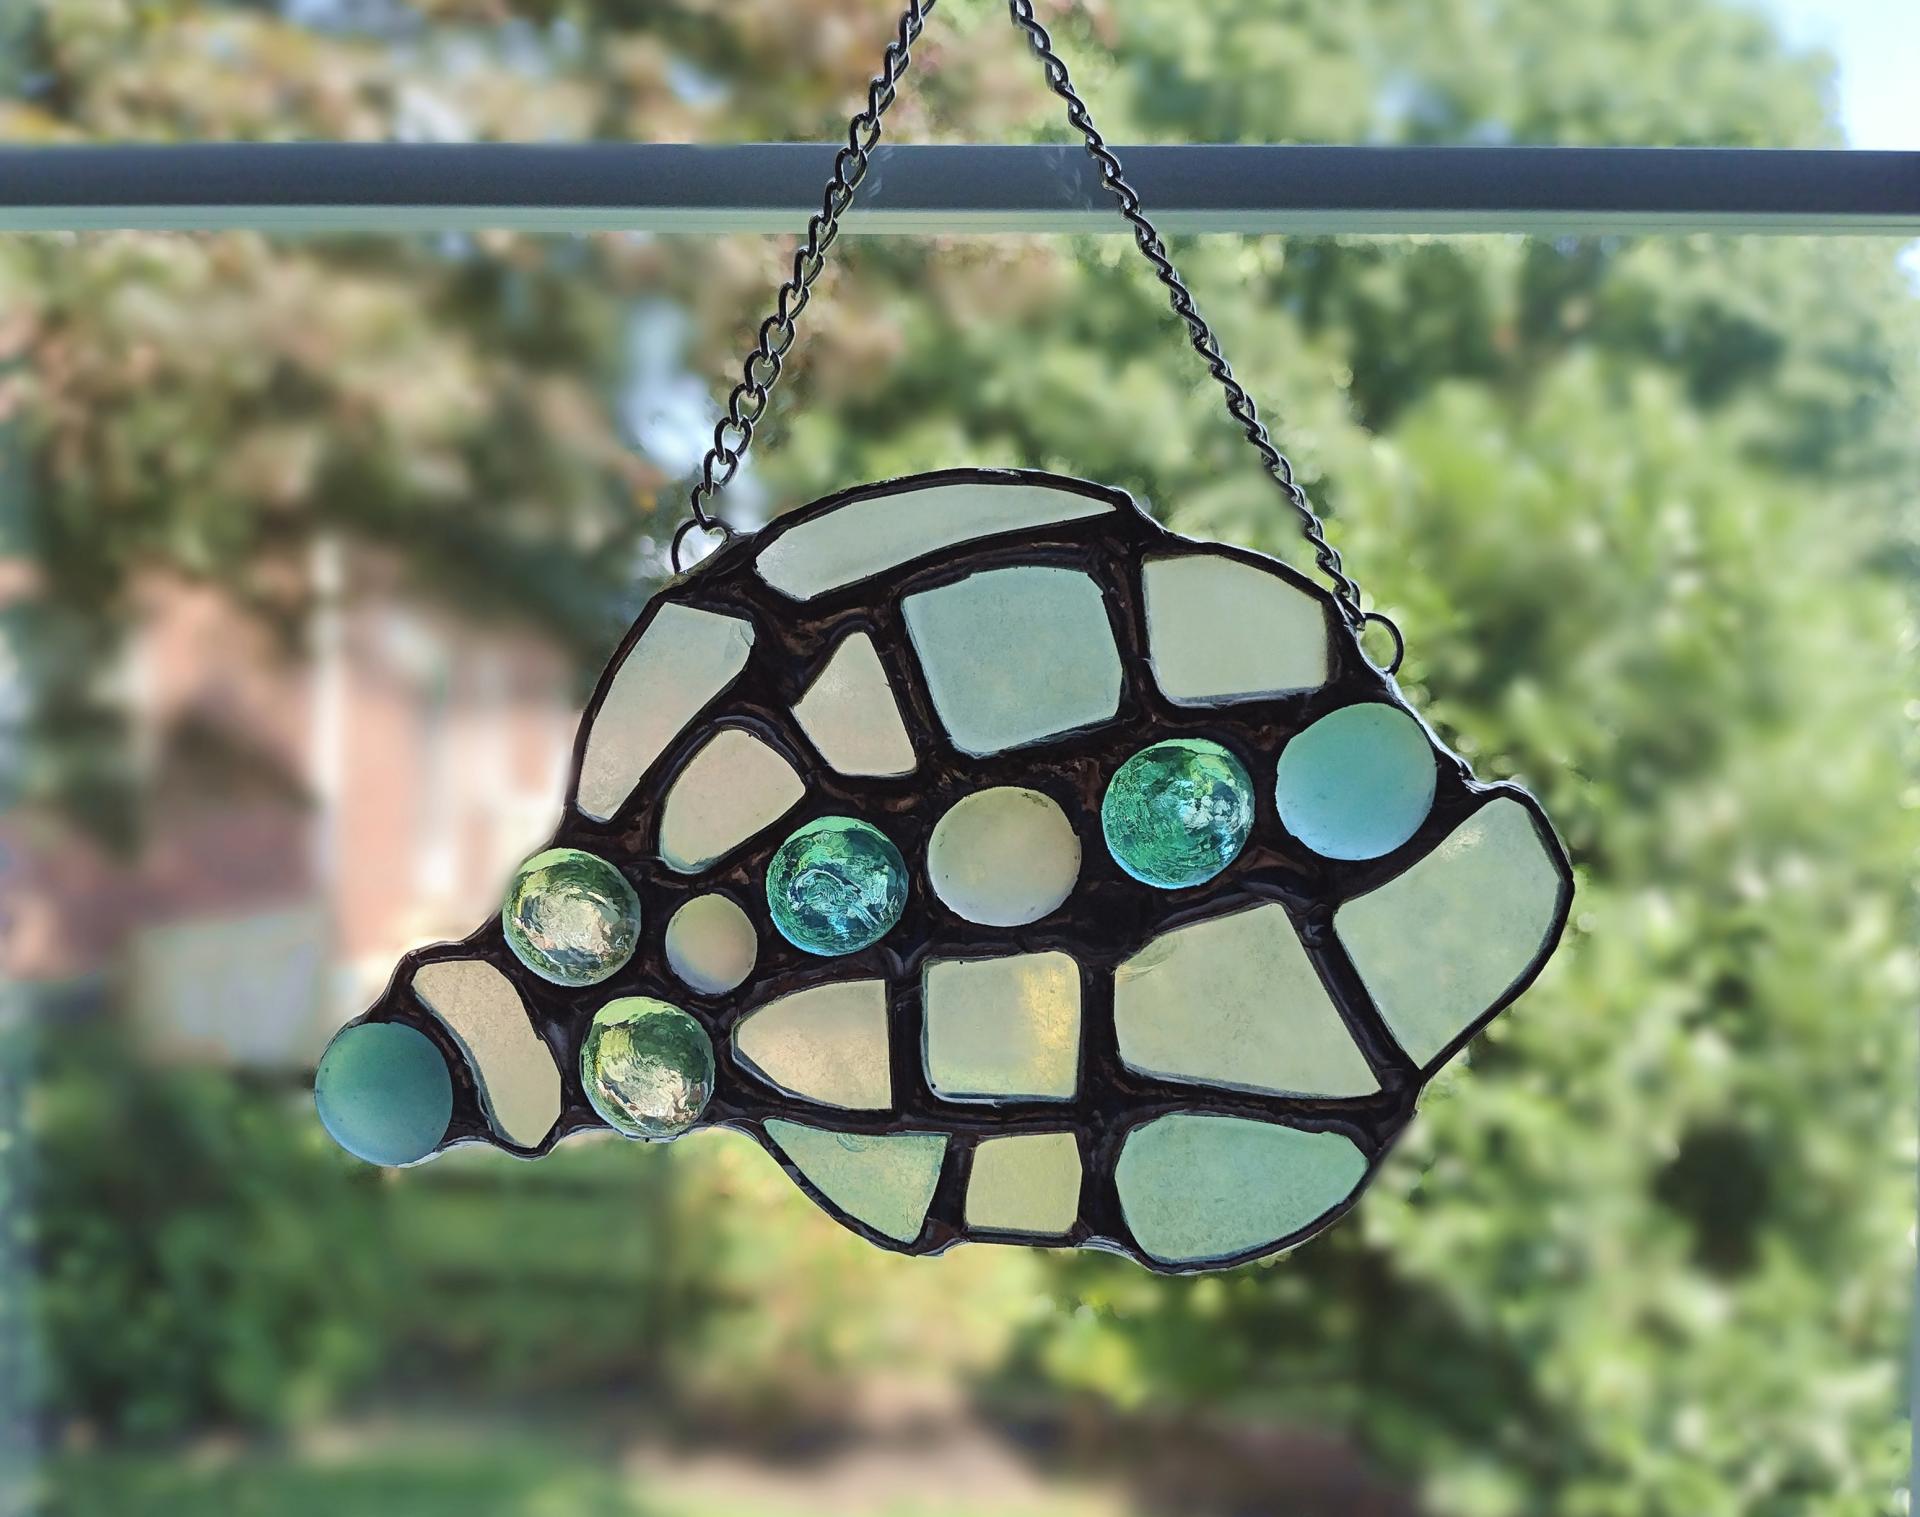 conch shell suncatcher made with pale blue, green, and yellow sea glass and glass jewels, measures approximately seven inches by four inches, attached chain and suction cup holder included.